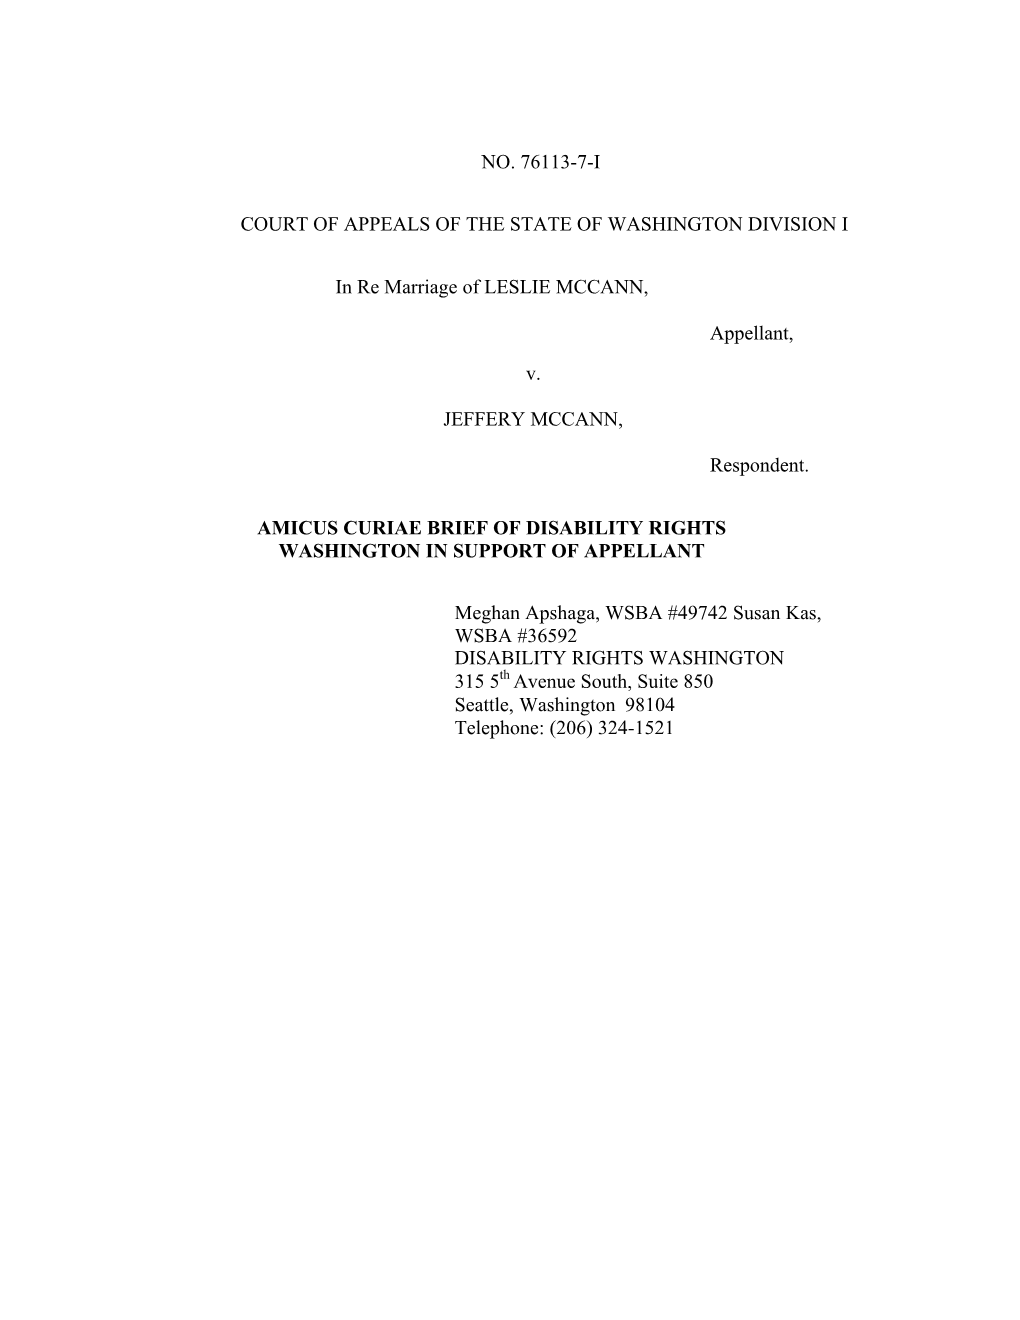 Court of Appeals of the State of Washington Division I